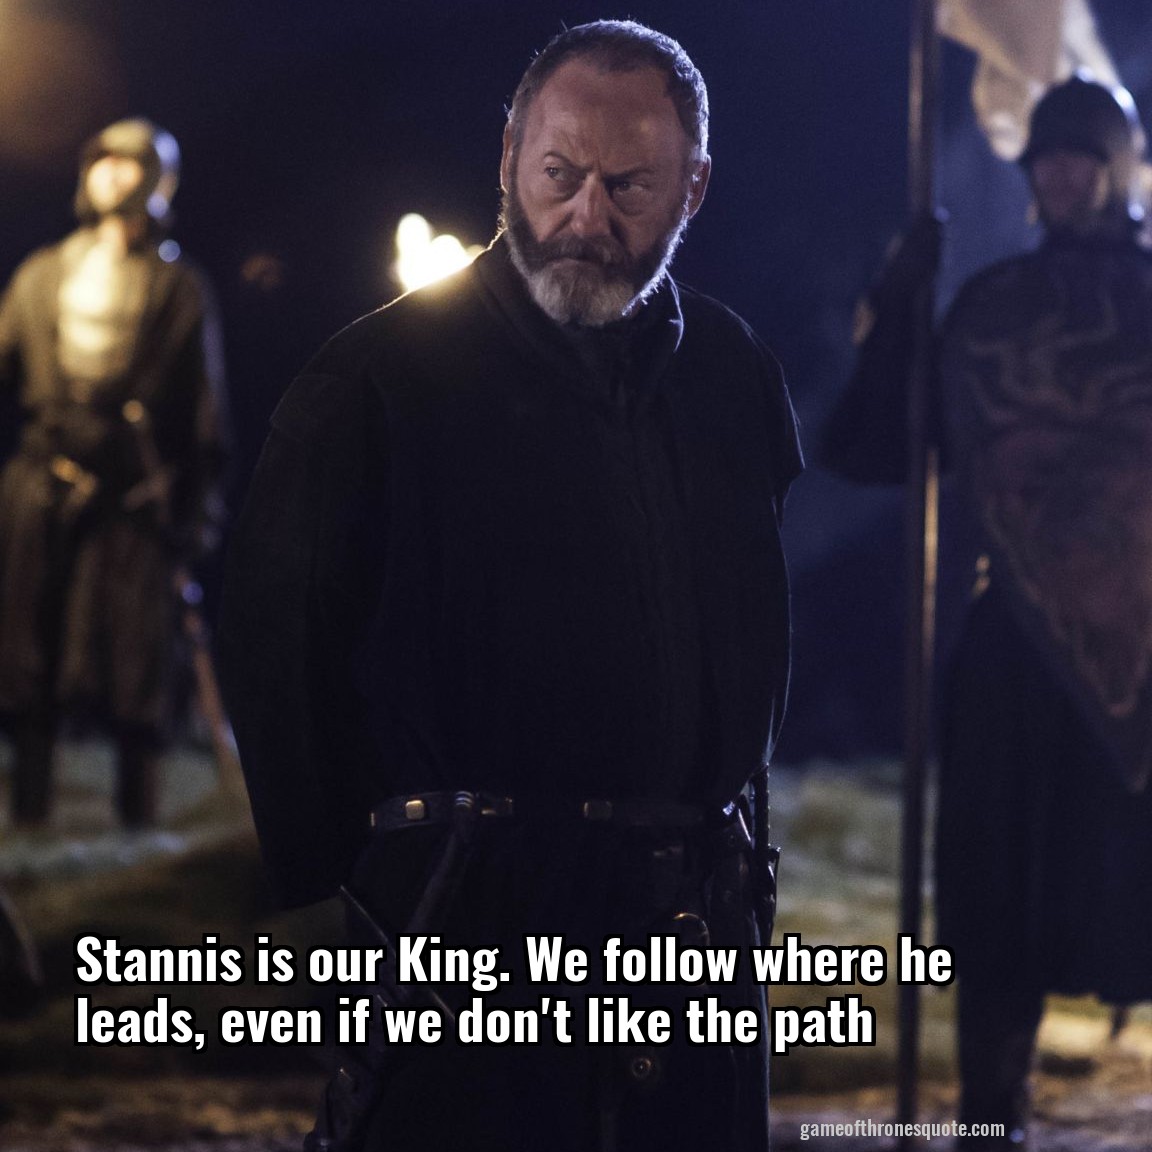 Stannis is our King. We follow where he leads, even if we don't like the path